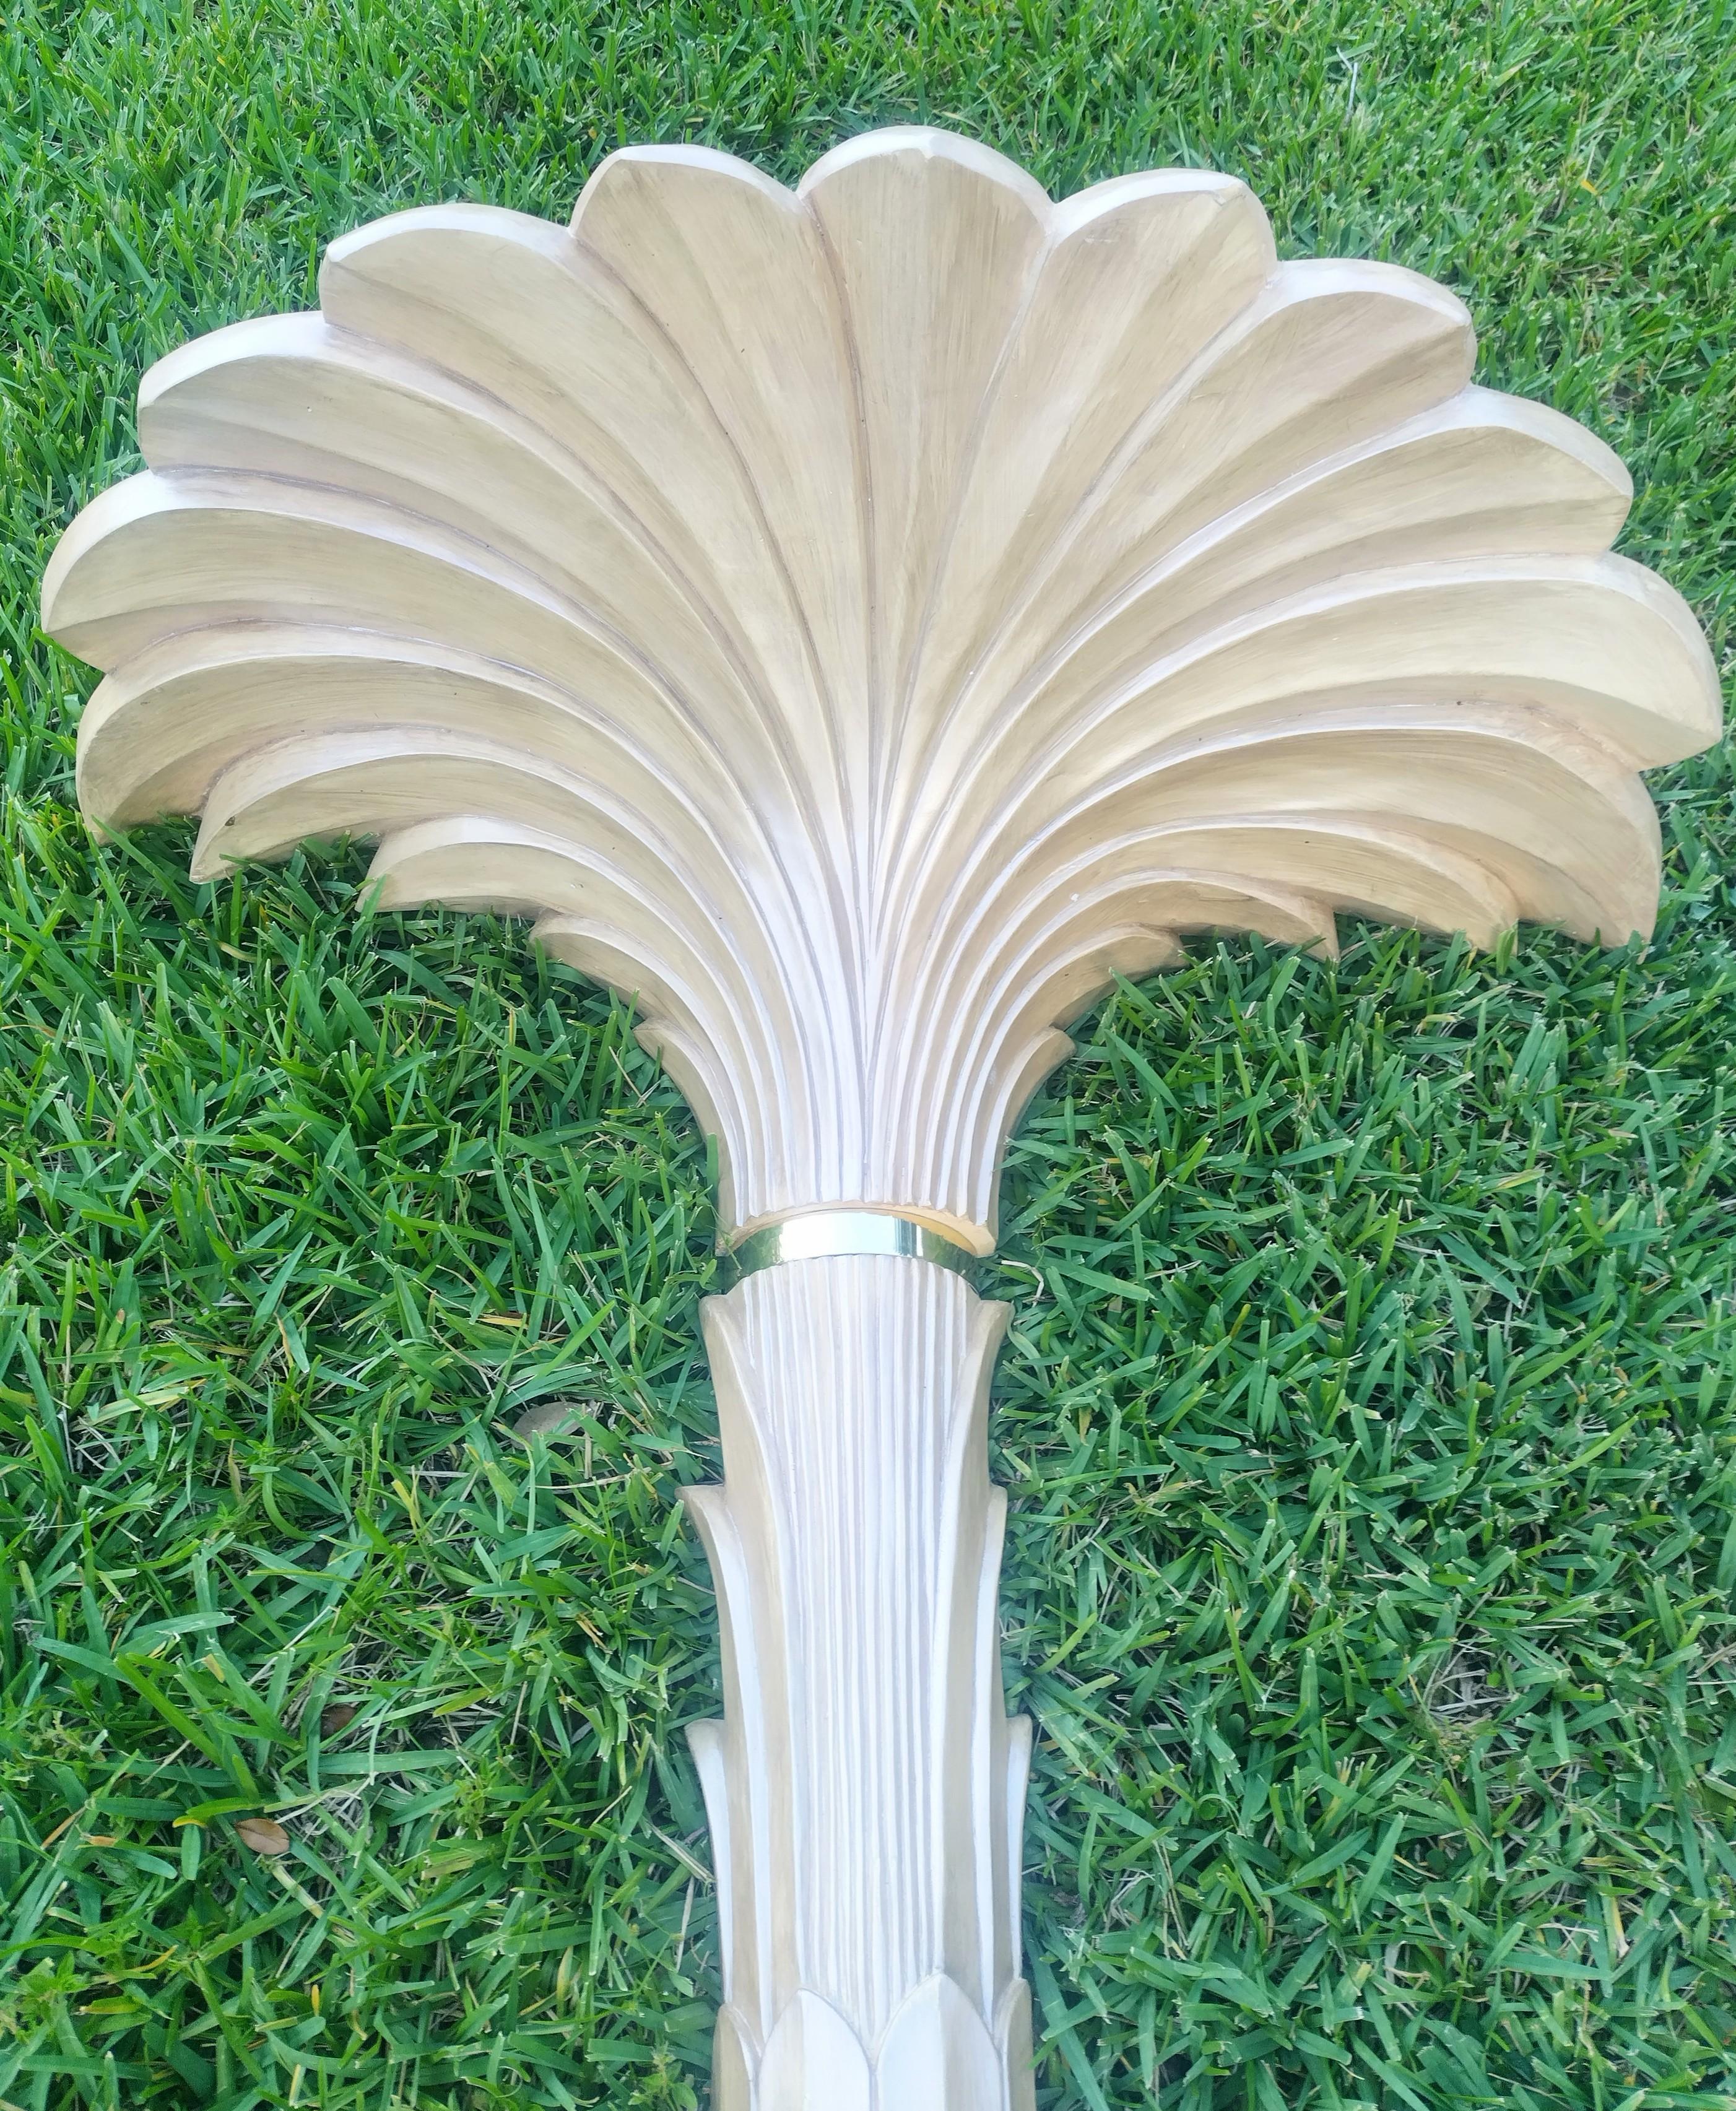 Monumental Vintage Merle Edelman Serge Roche Style Palm Torchiere Wall Sconce In Good Condition For Sale In Jensen Beach, FL